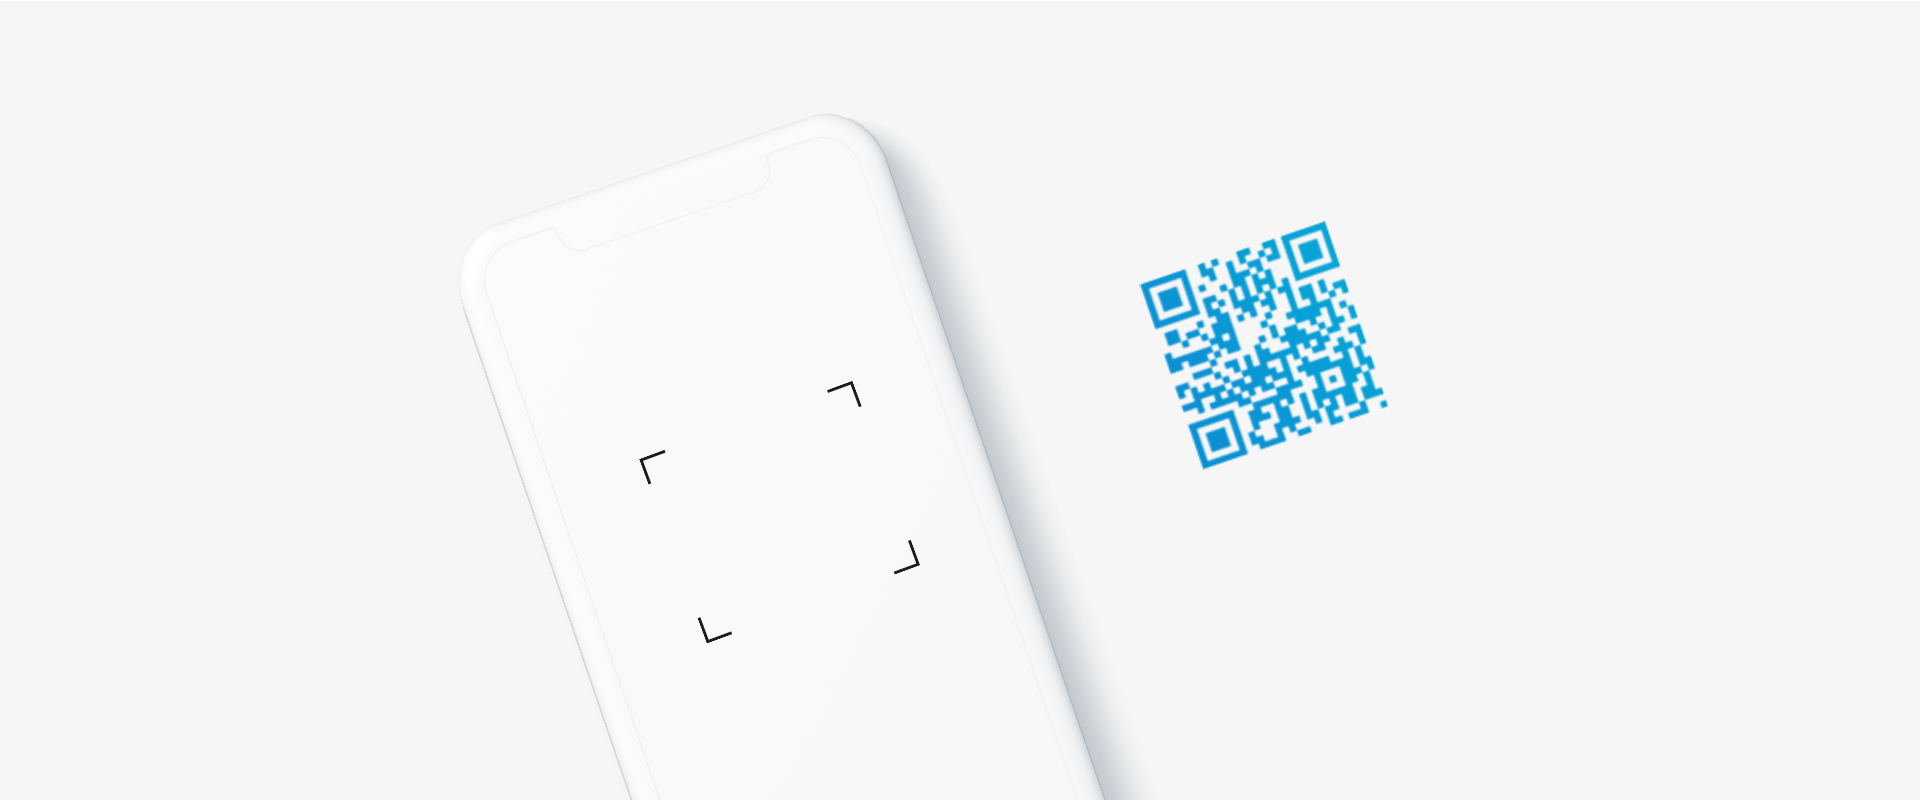 2020: The Year of QR Codes